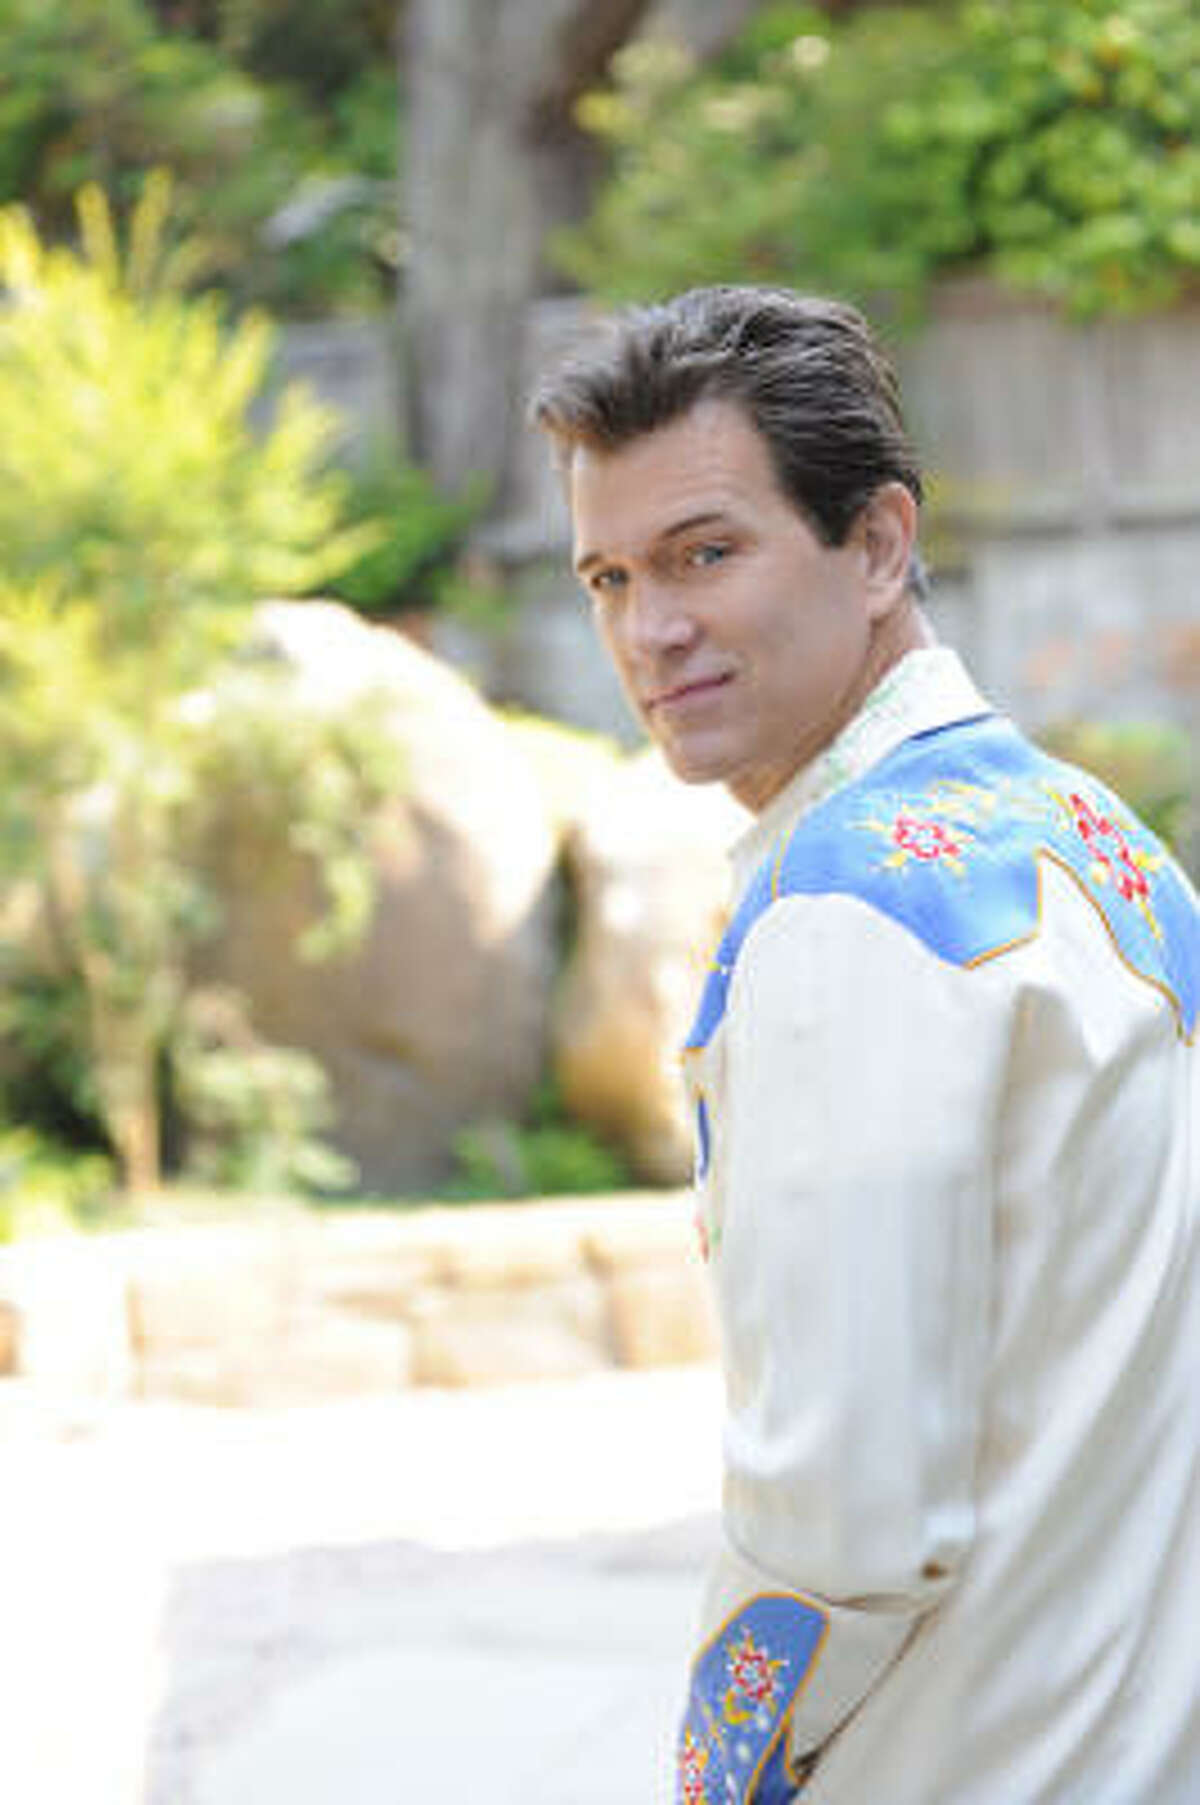 Chris Isaak said he's always felt comfortable in his sparkly shirts and suits.